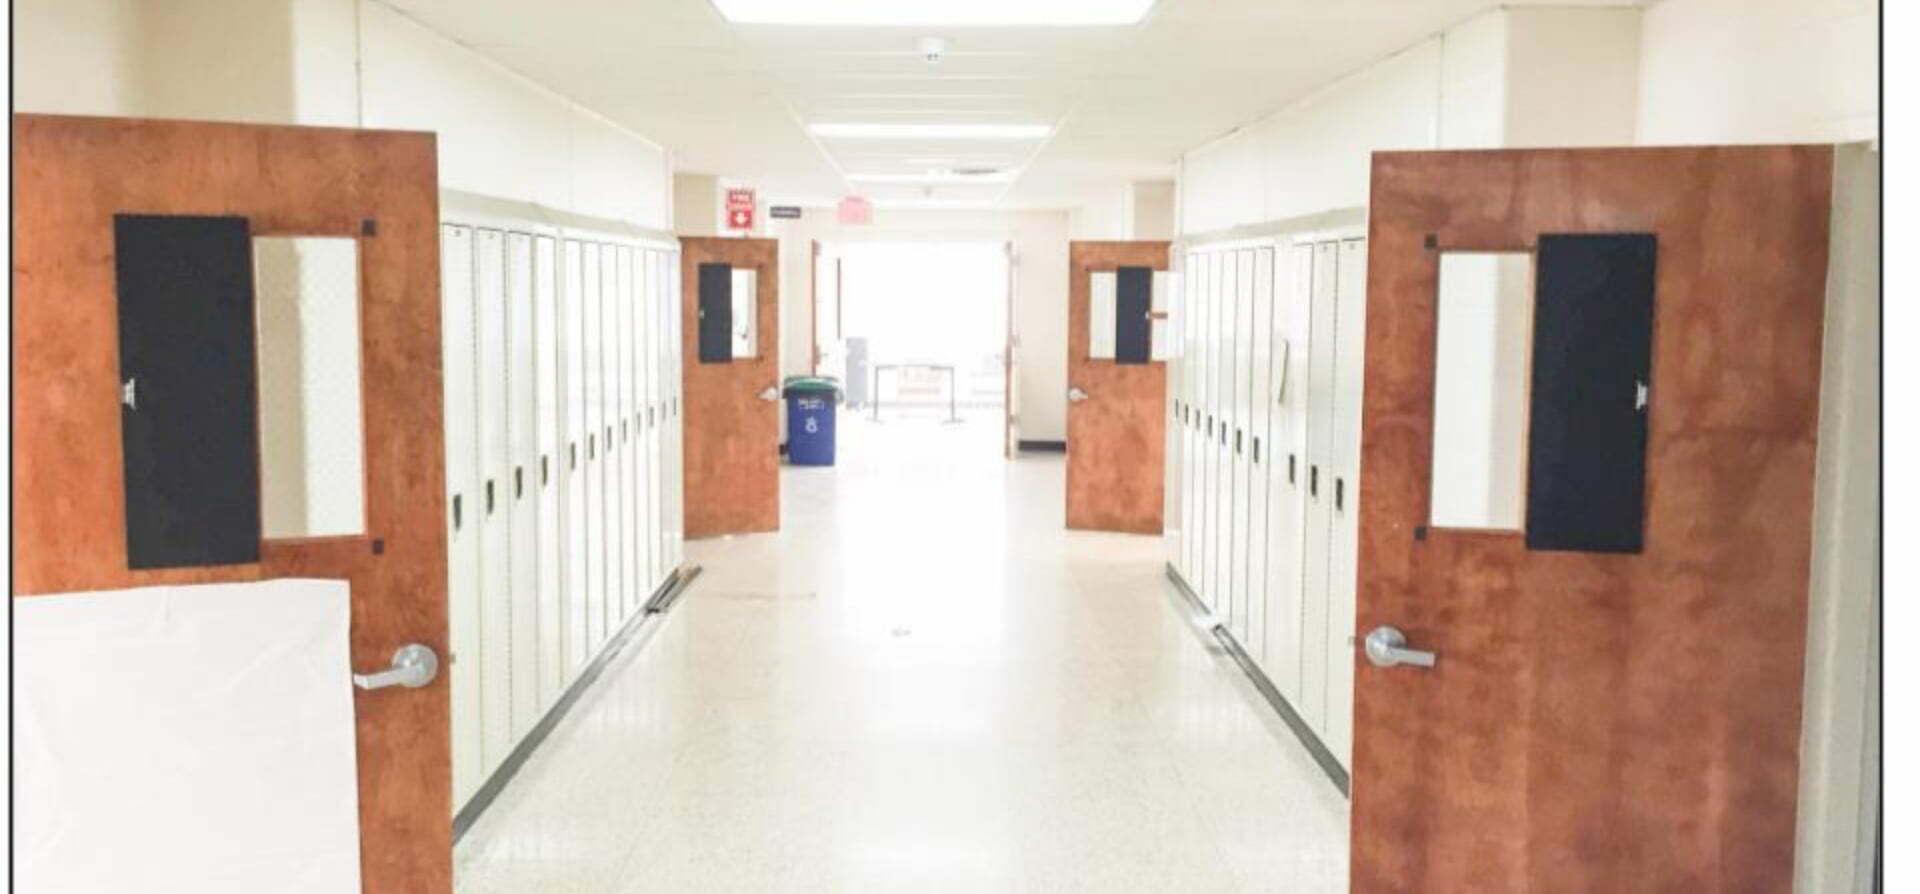 A hallway with lockers and a door open.